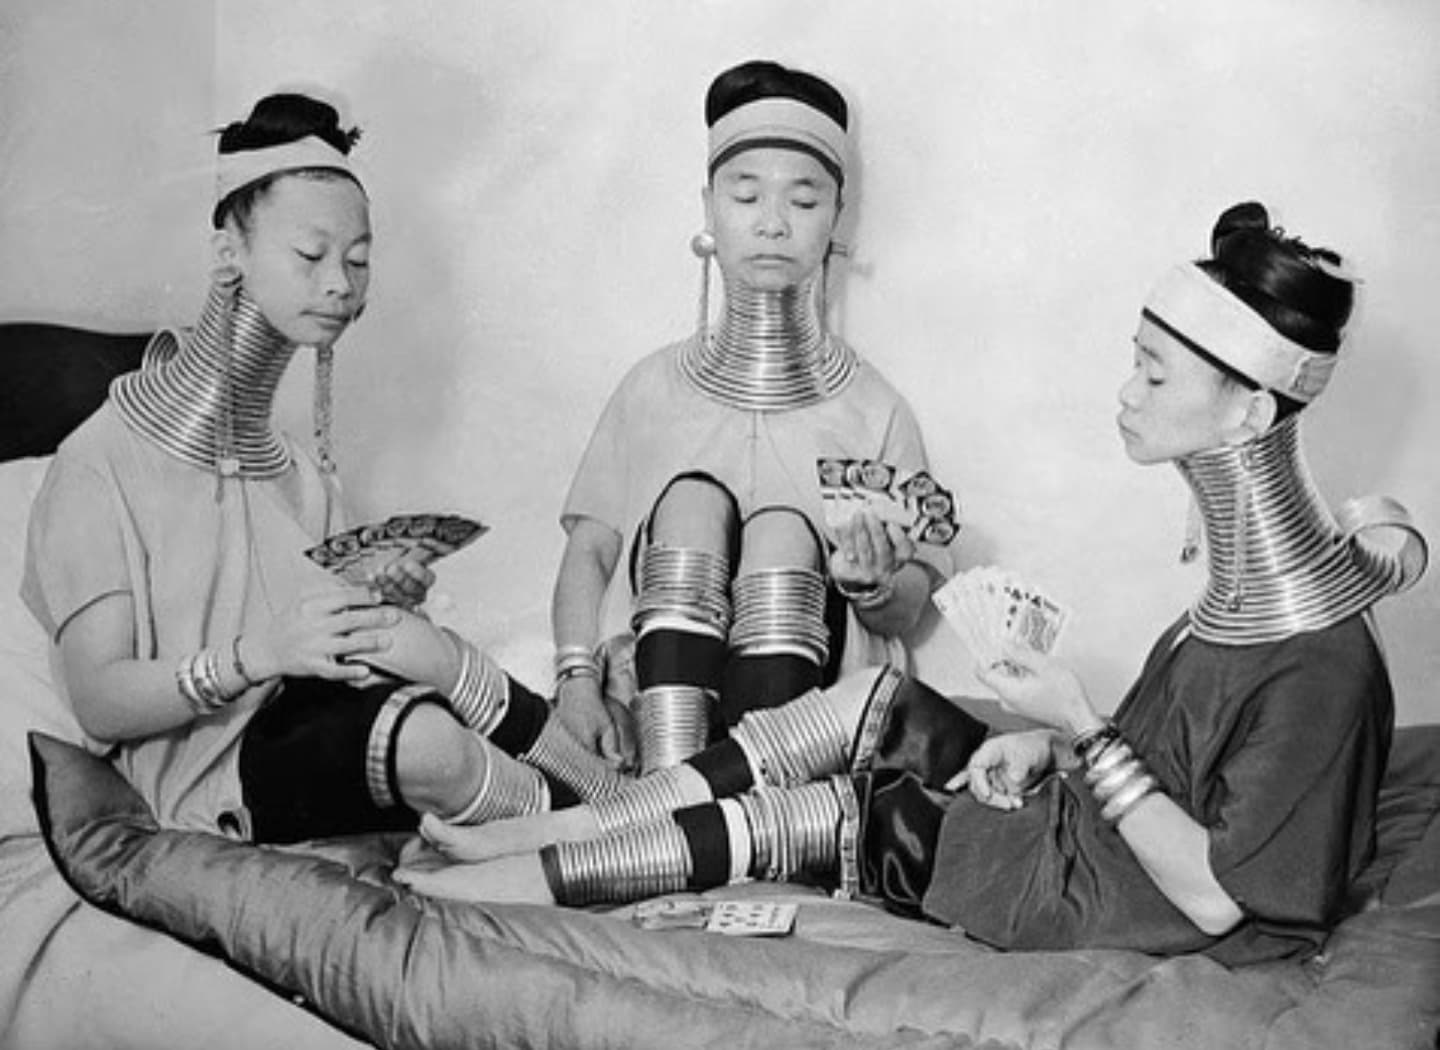 Three Burmese women, members of a circus, wear brass neck and leg rings traditionally worn by Padaung women since childhood and which cannot be removed, New York, c. 1930's